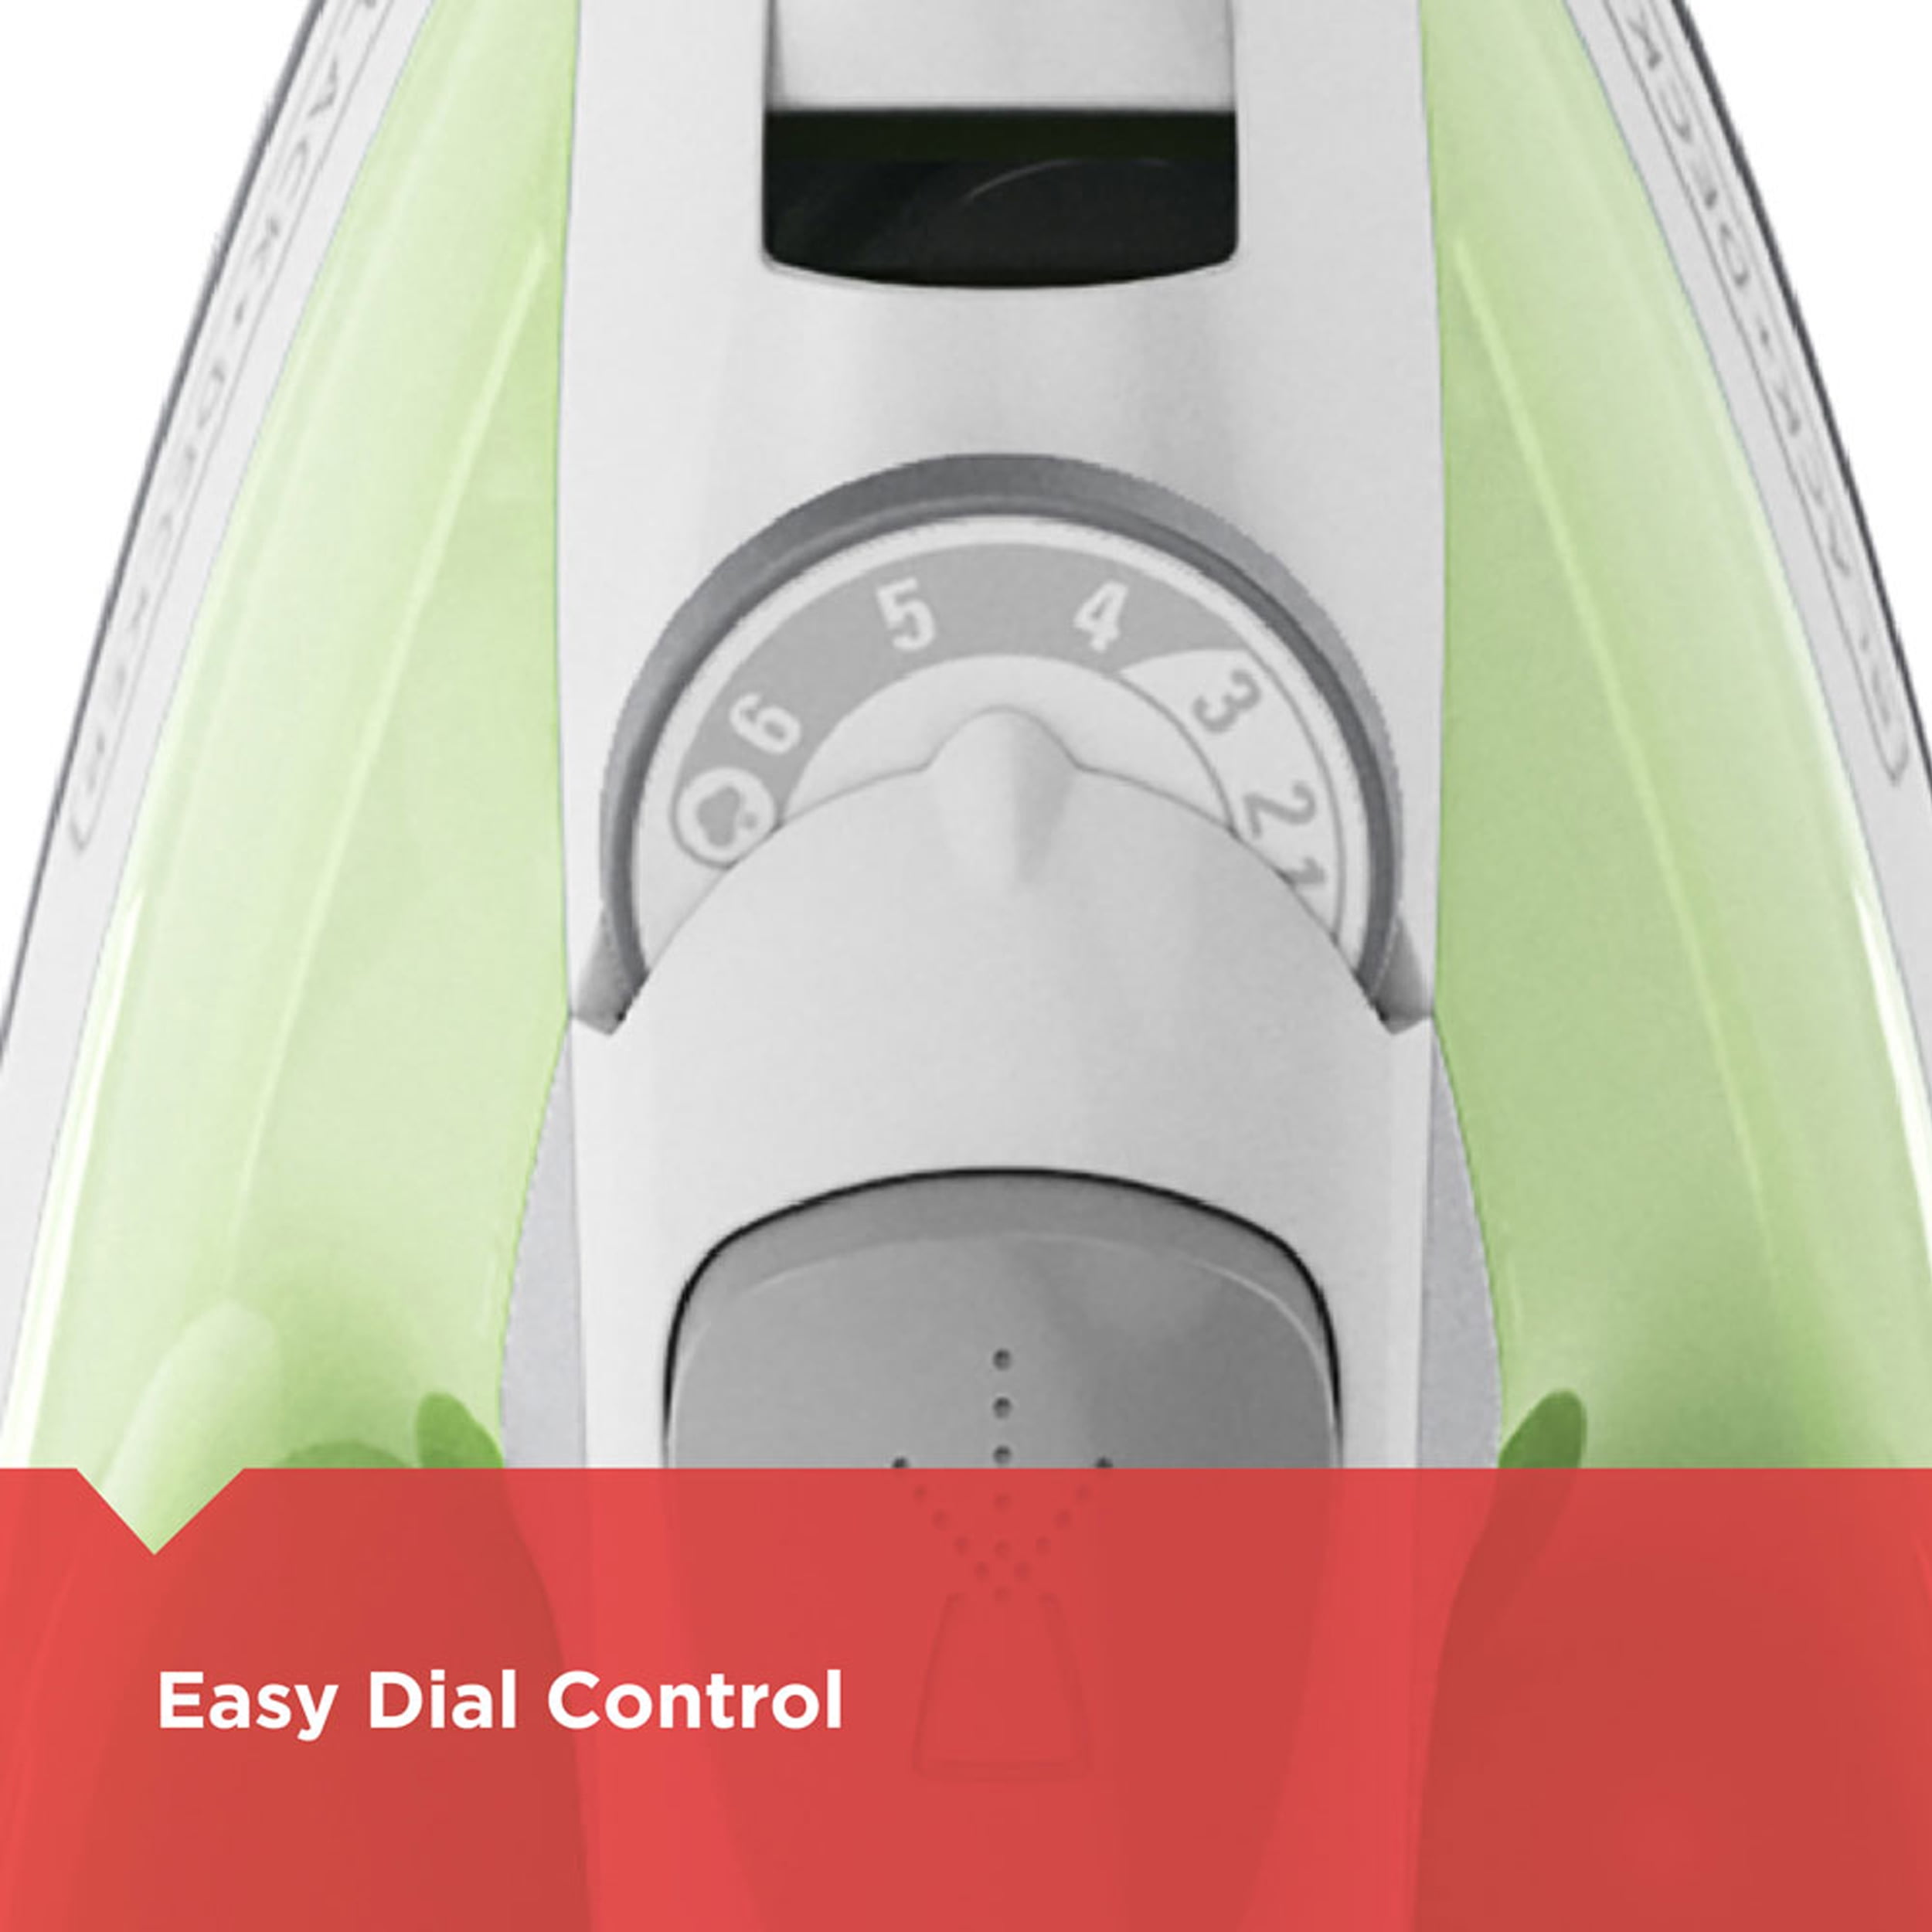 Effortlessly Remove Wrinkles with the BLACK+DECKER Easy Steam Compact Iron